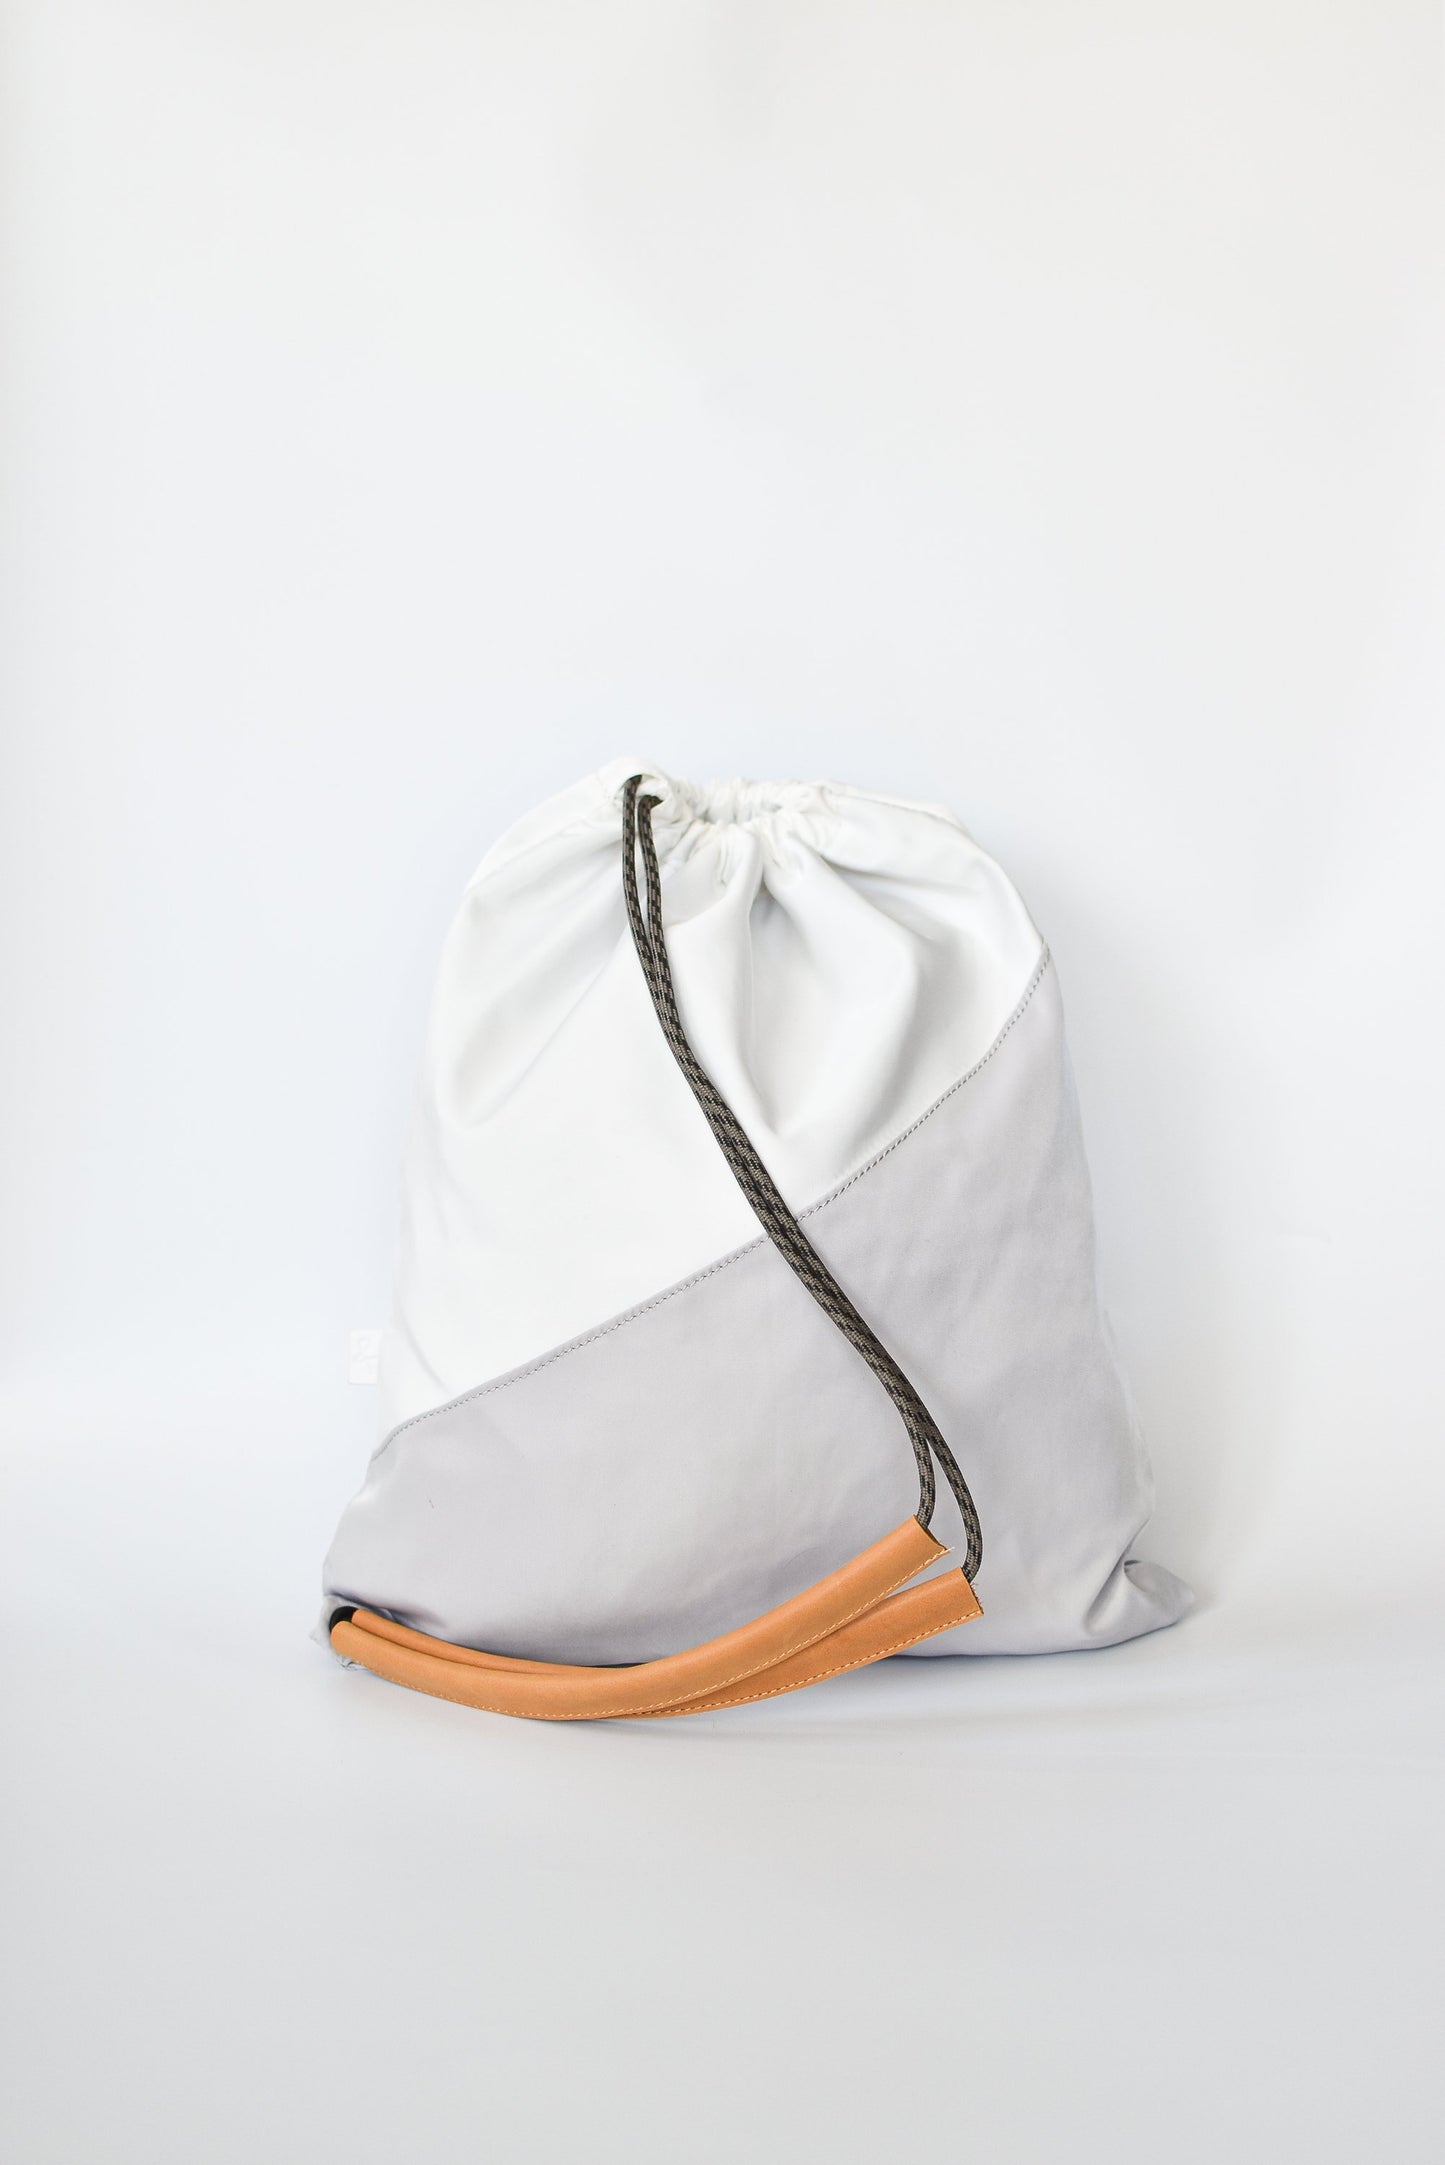 Sporty nylon sling bag in white and gray with natural leather straps. 